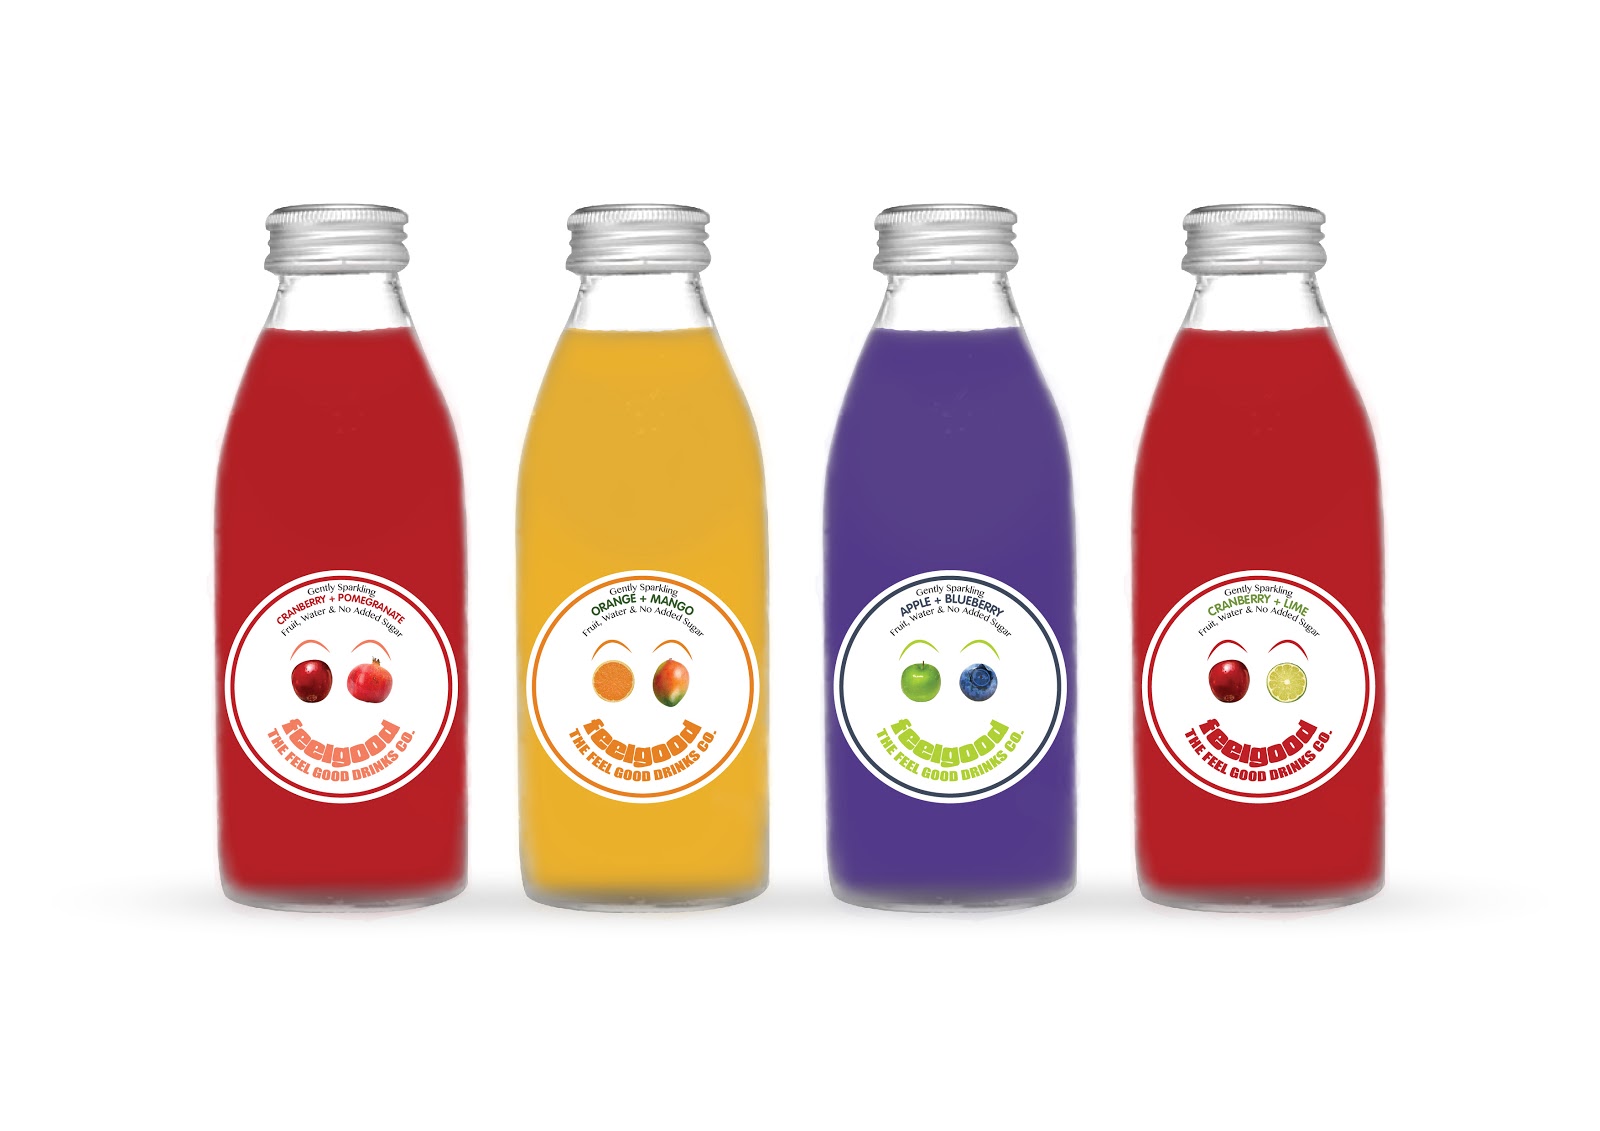 Feel good drink. Asian Beverage Company ТОО. Drink Label Design. Zumo Company Drinks. Design for Drink.